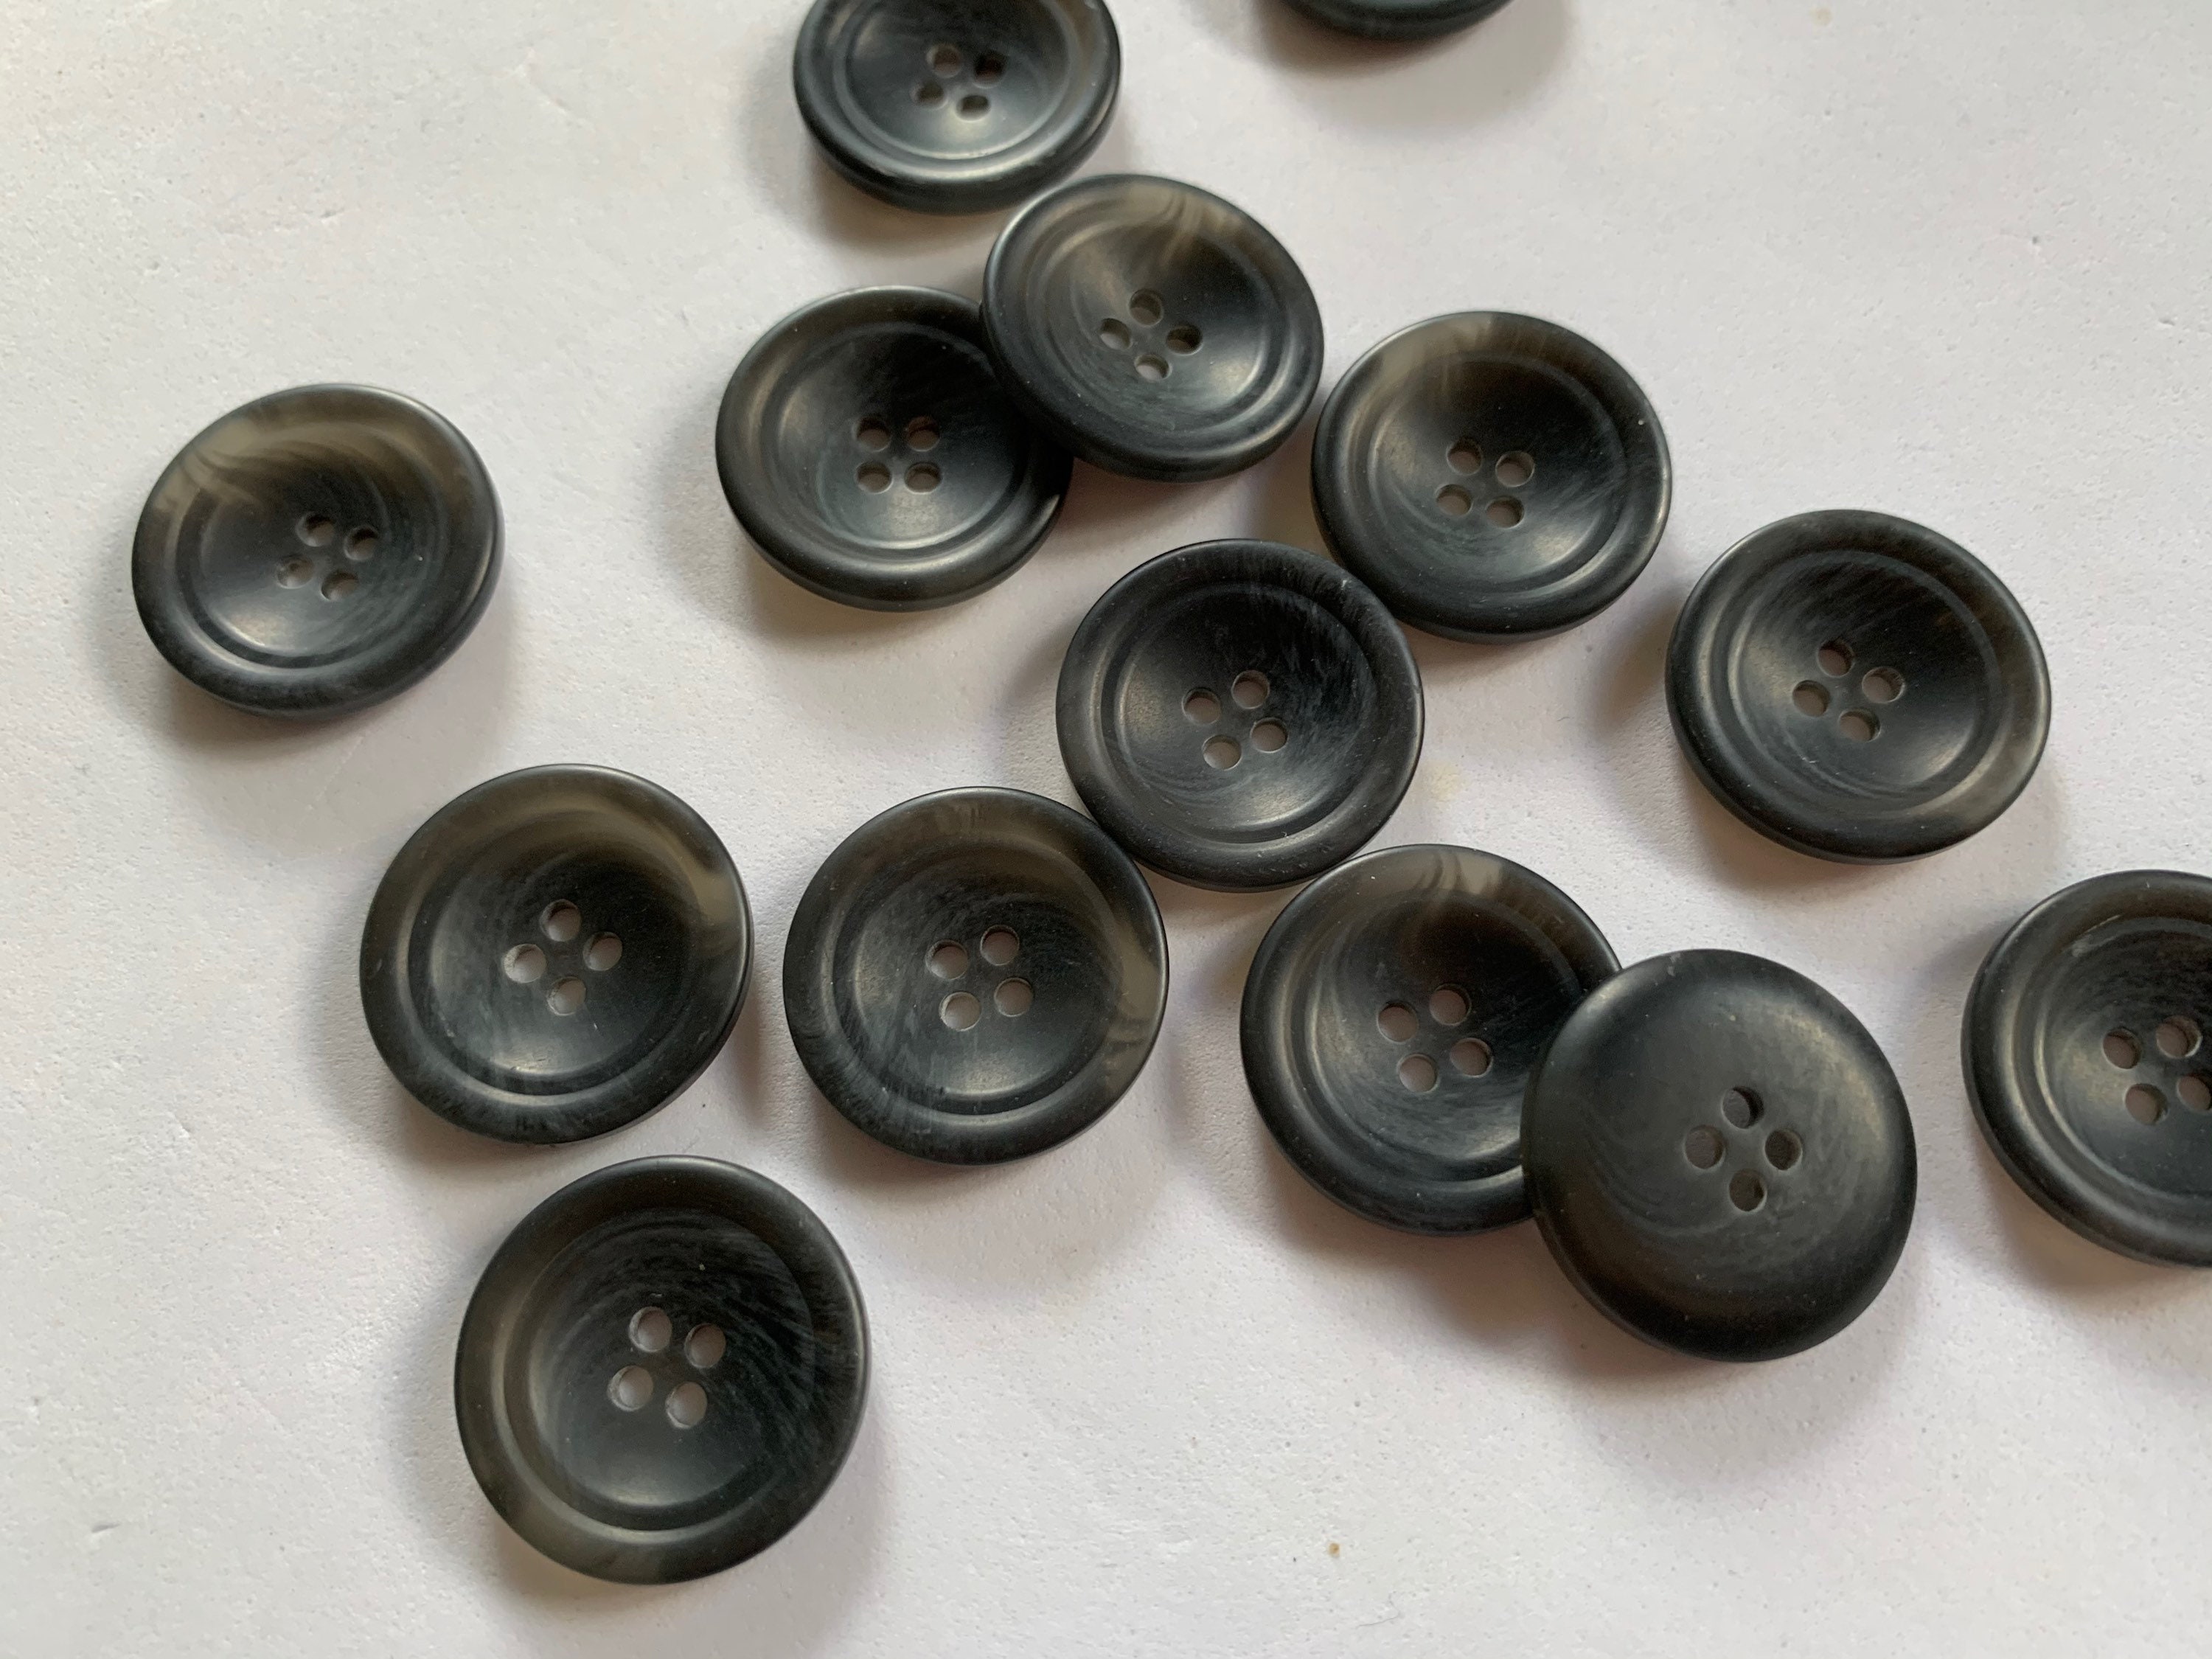 Medium marbled dark gray sewing buttons plastic sewing buttons | Etsy